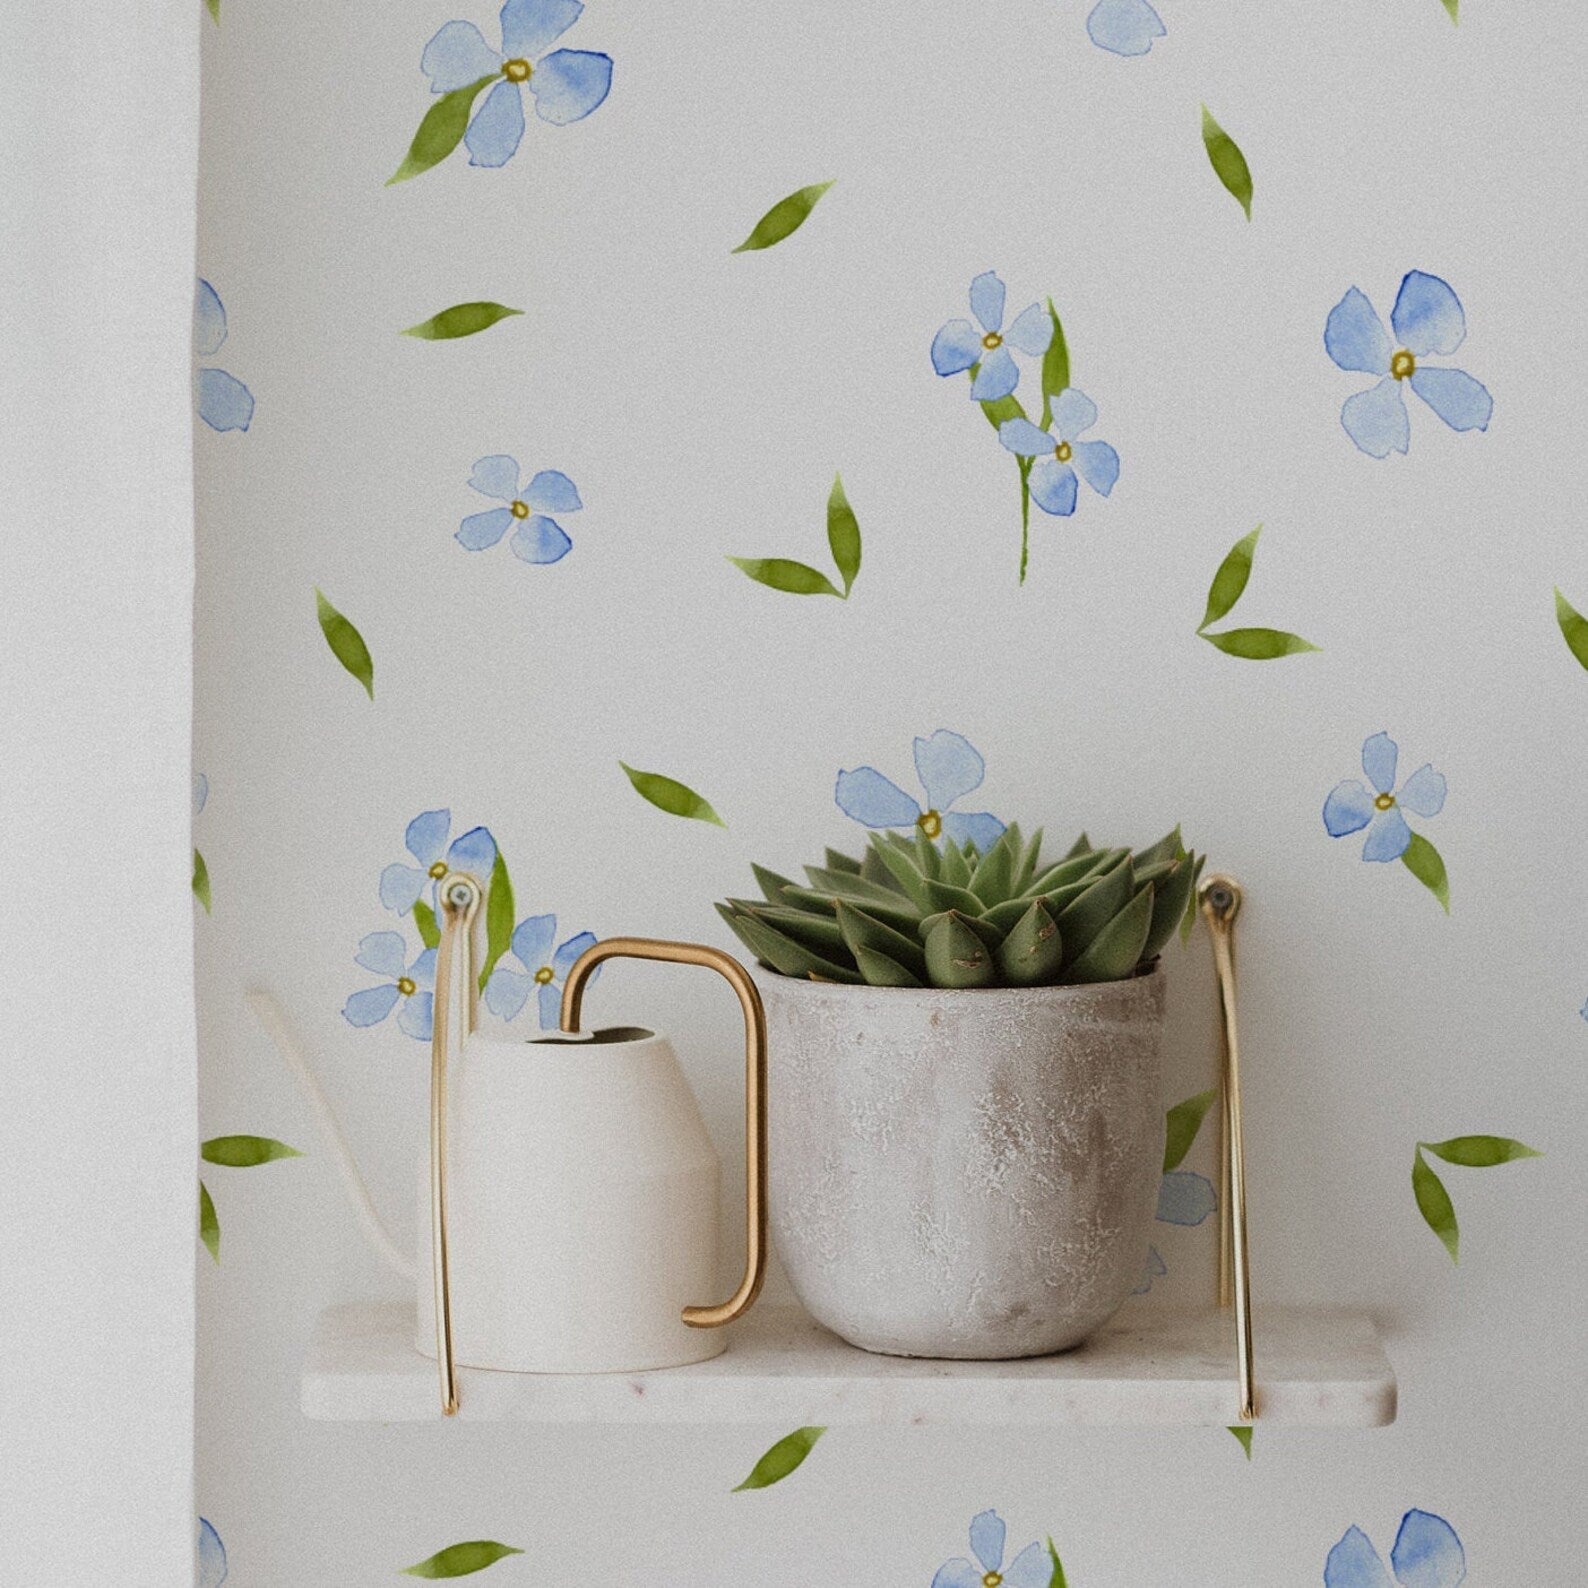 A stylish home corner featuring the Tiny Blue Watercolour Floral Wallpaper on the wall, with a decorative shelf holding a watering can and a succulent in a rustic pot. The soft floral pattern complements the minimalist and natural decor.